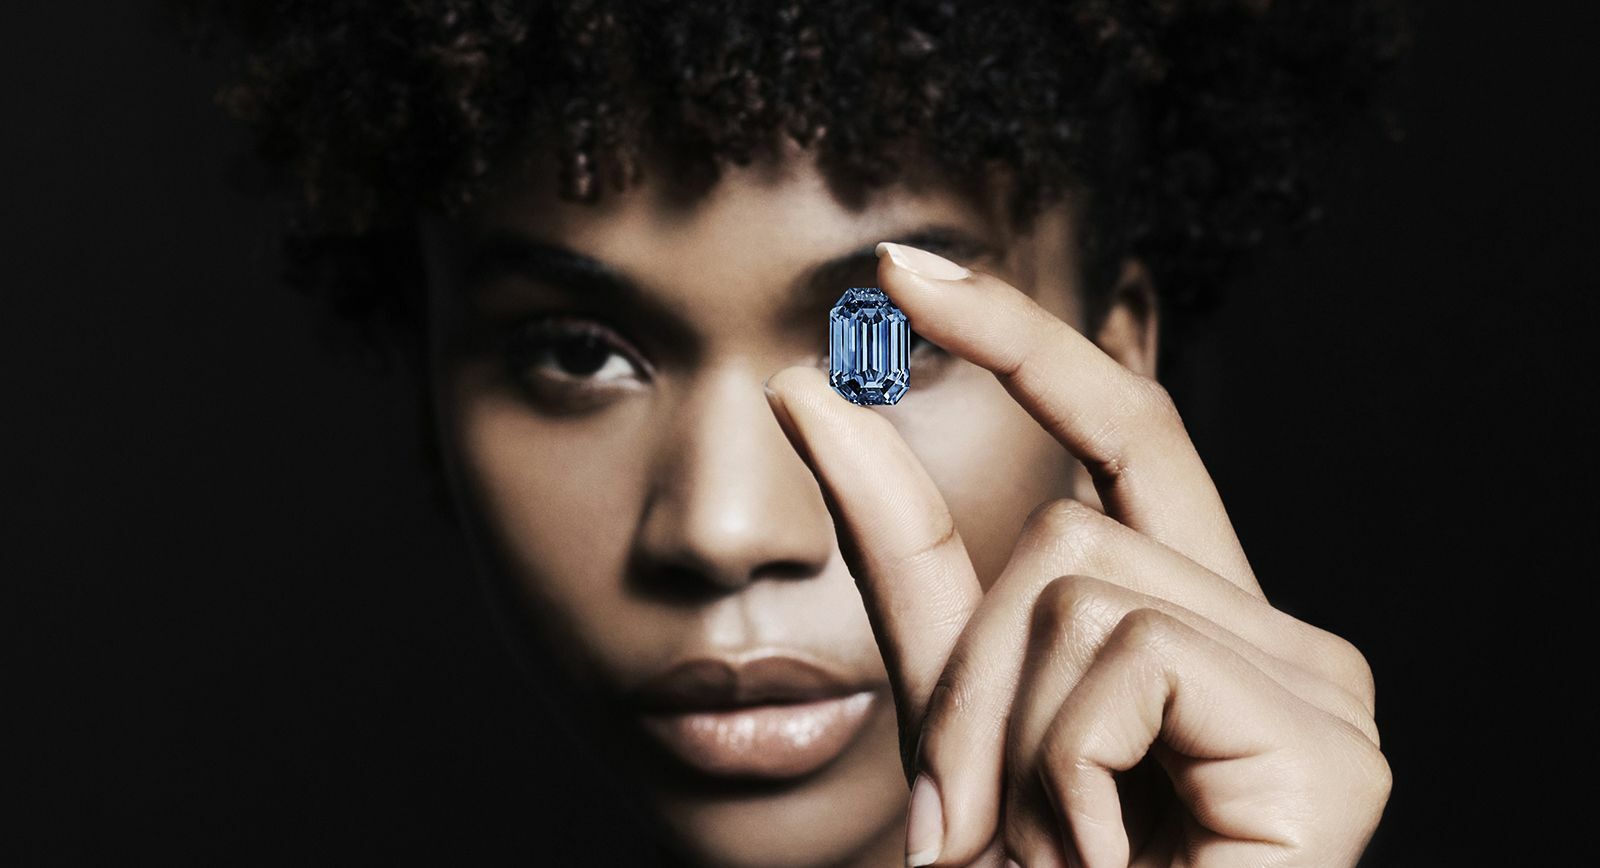 The De Beers Cullinan Blue Diamond - a 15.10 carat fancy vivid blue diamond to be auctioned by Sotheby's Hong Kong